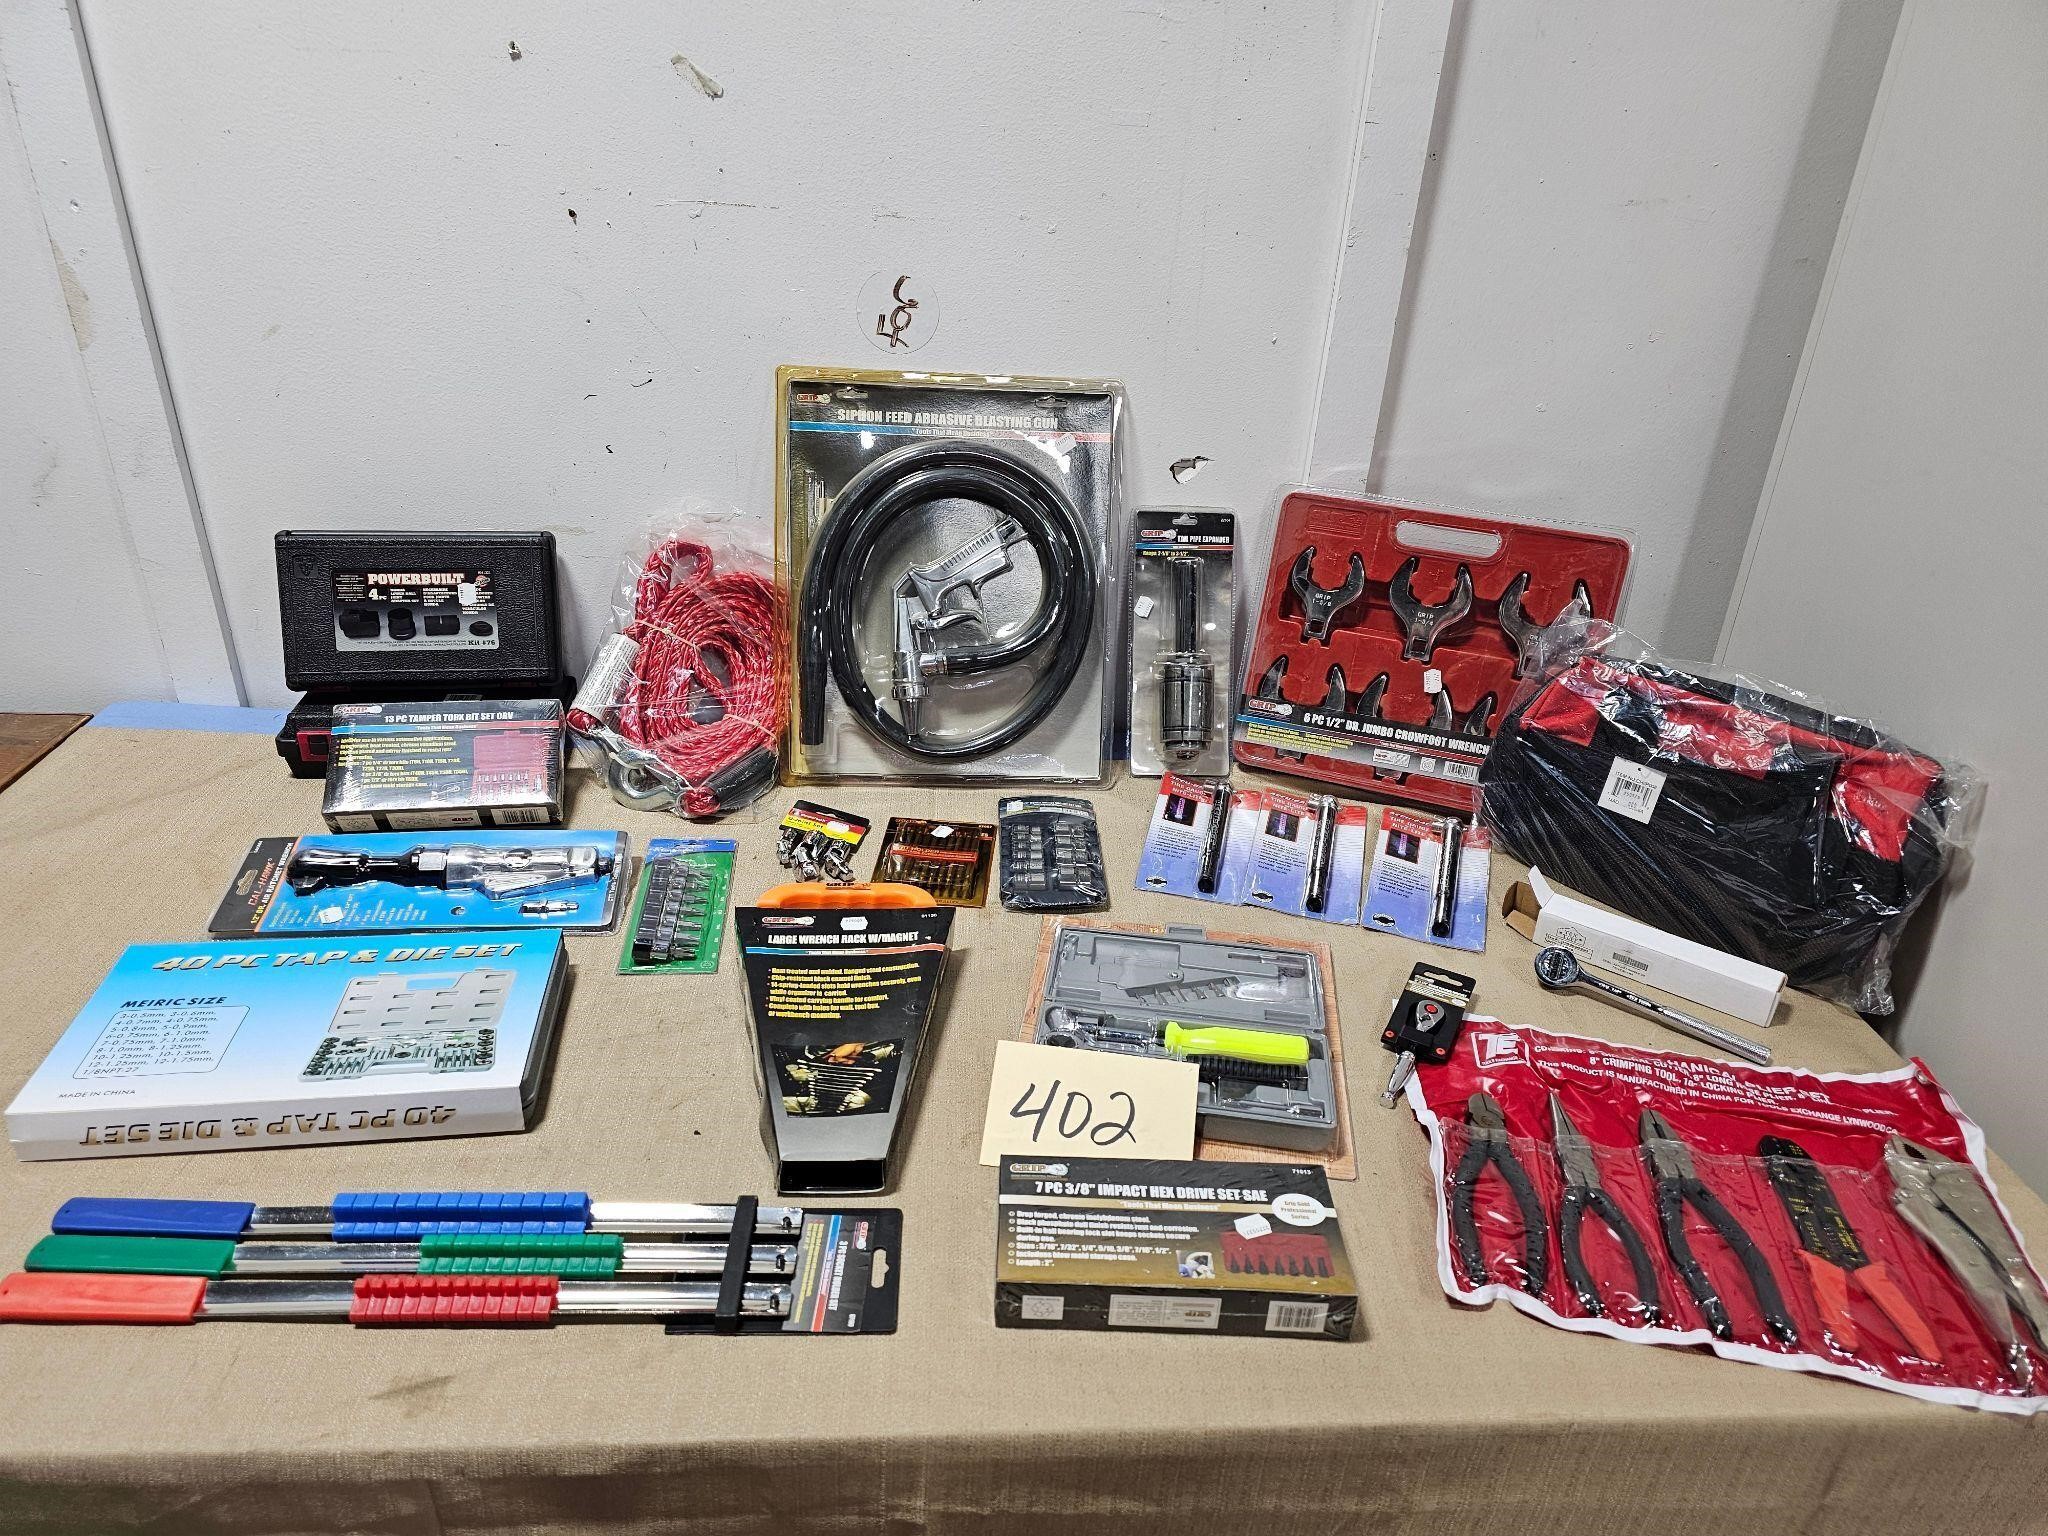 Thursday July 18th @ 6:00 PM Personal Property Auction